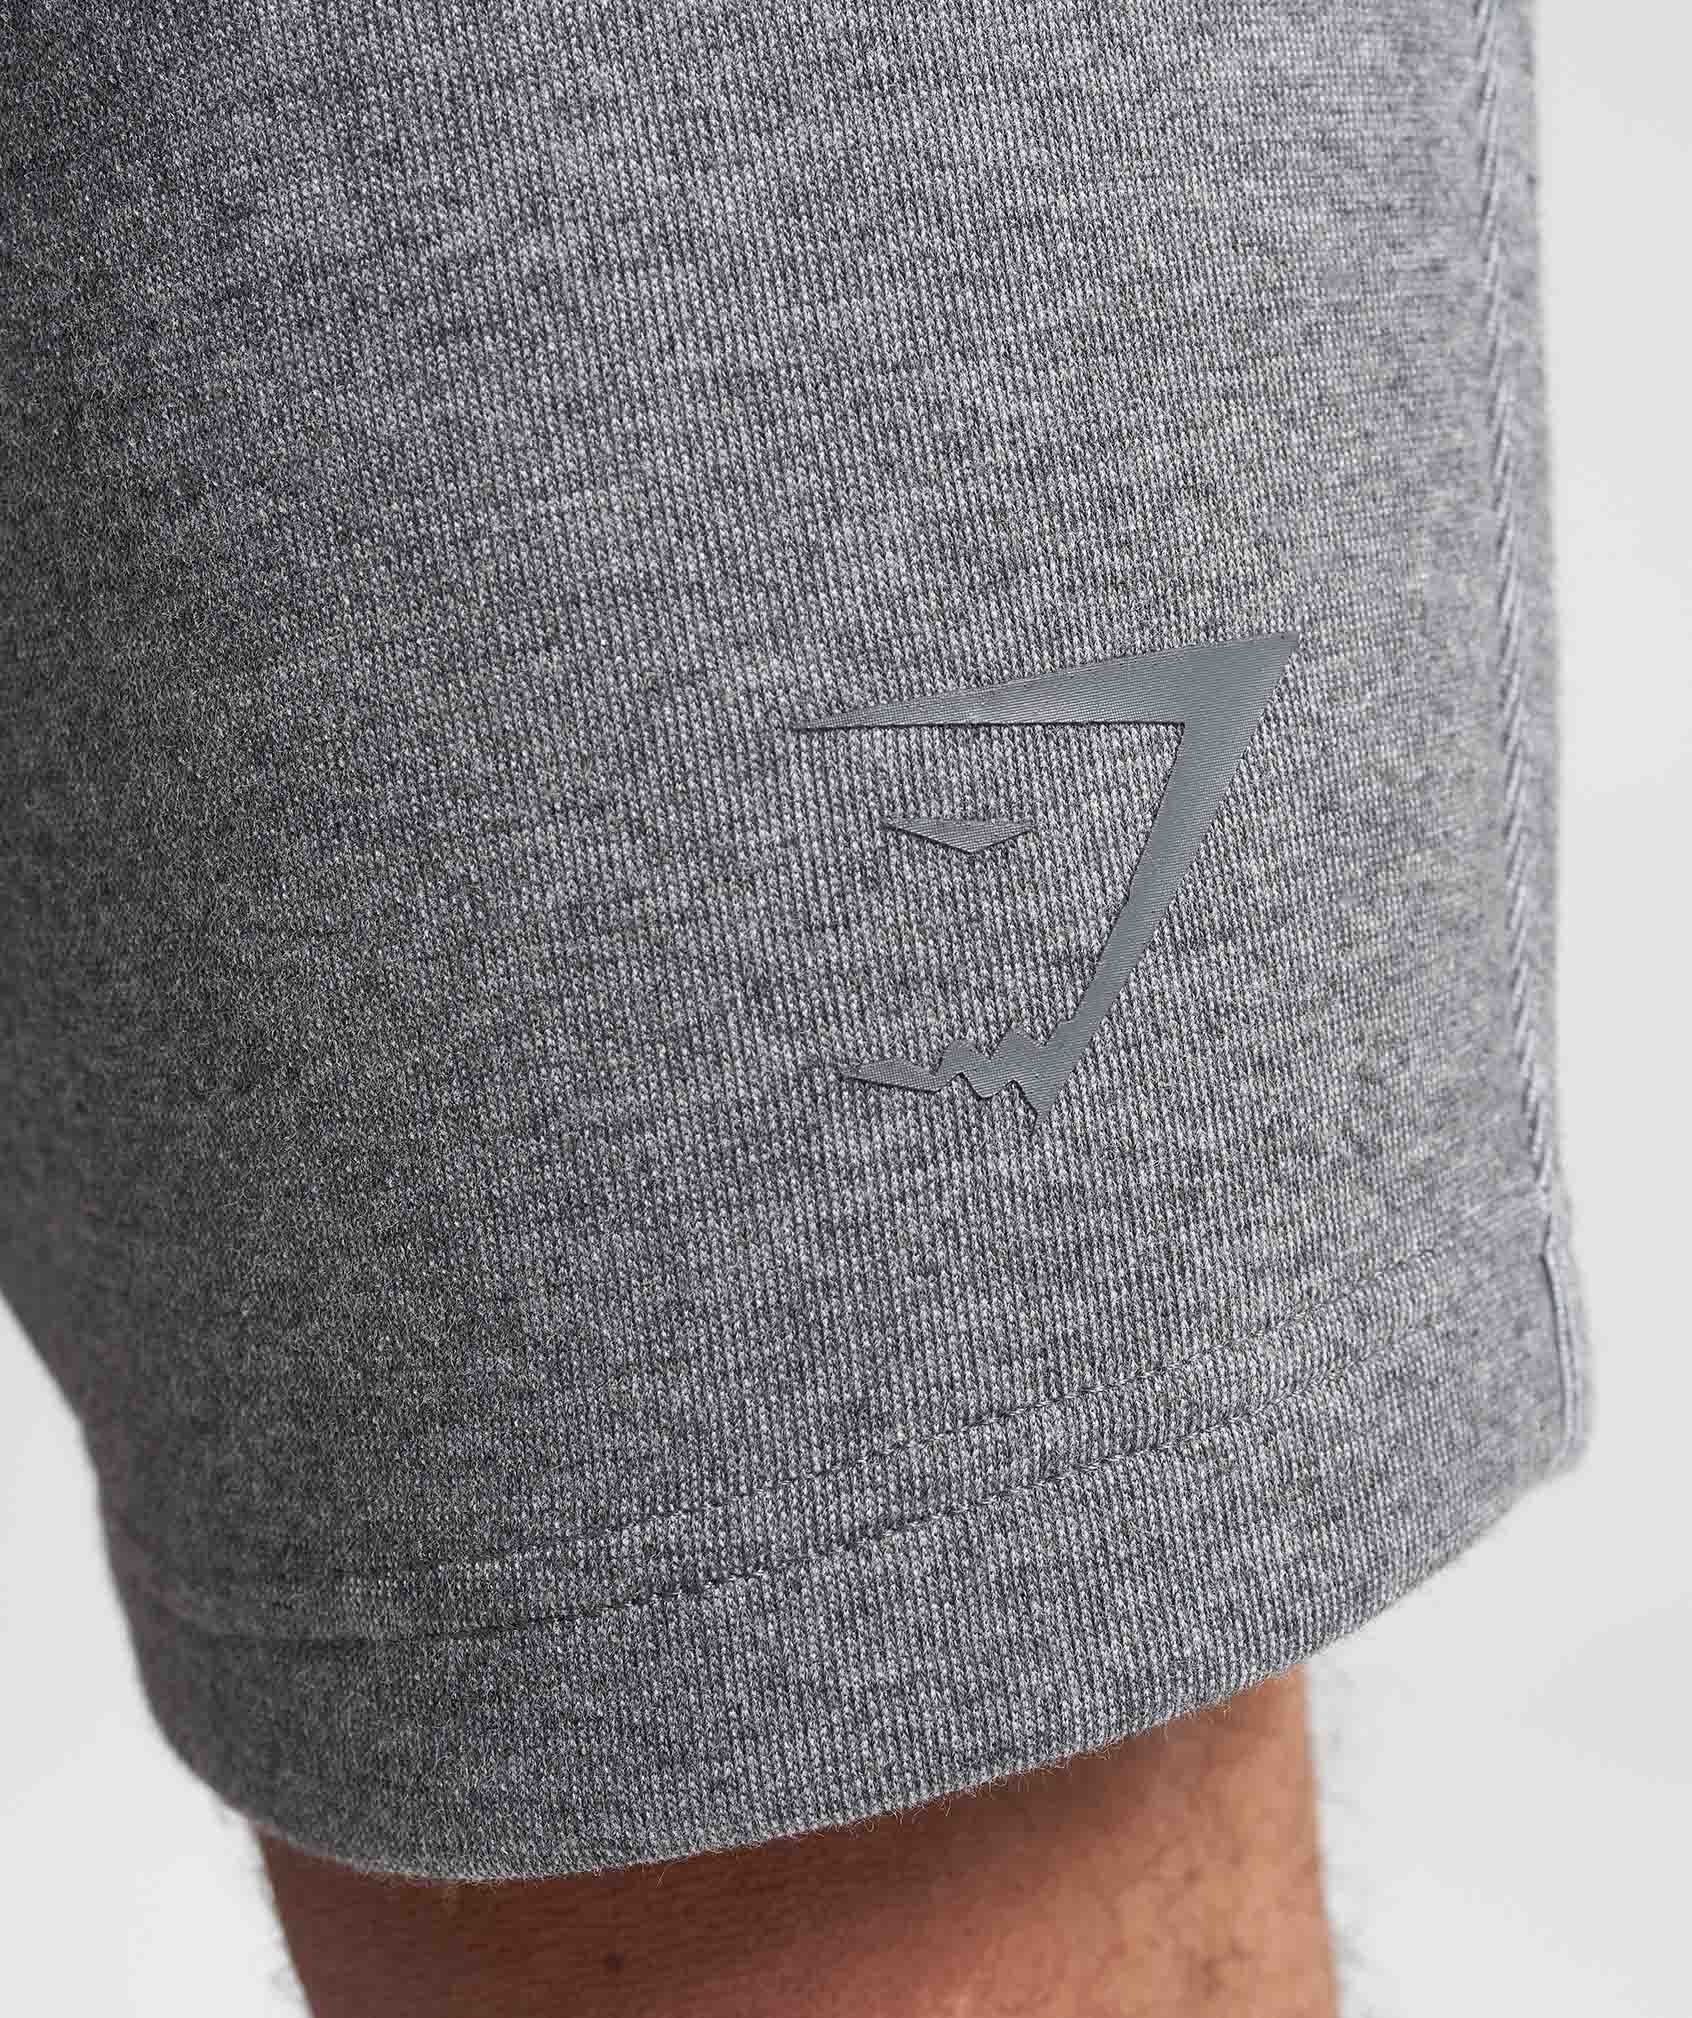 Ozone Shorts in Charcoal Marl - view 4